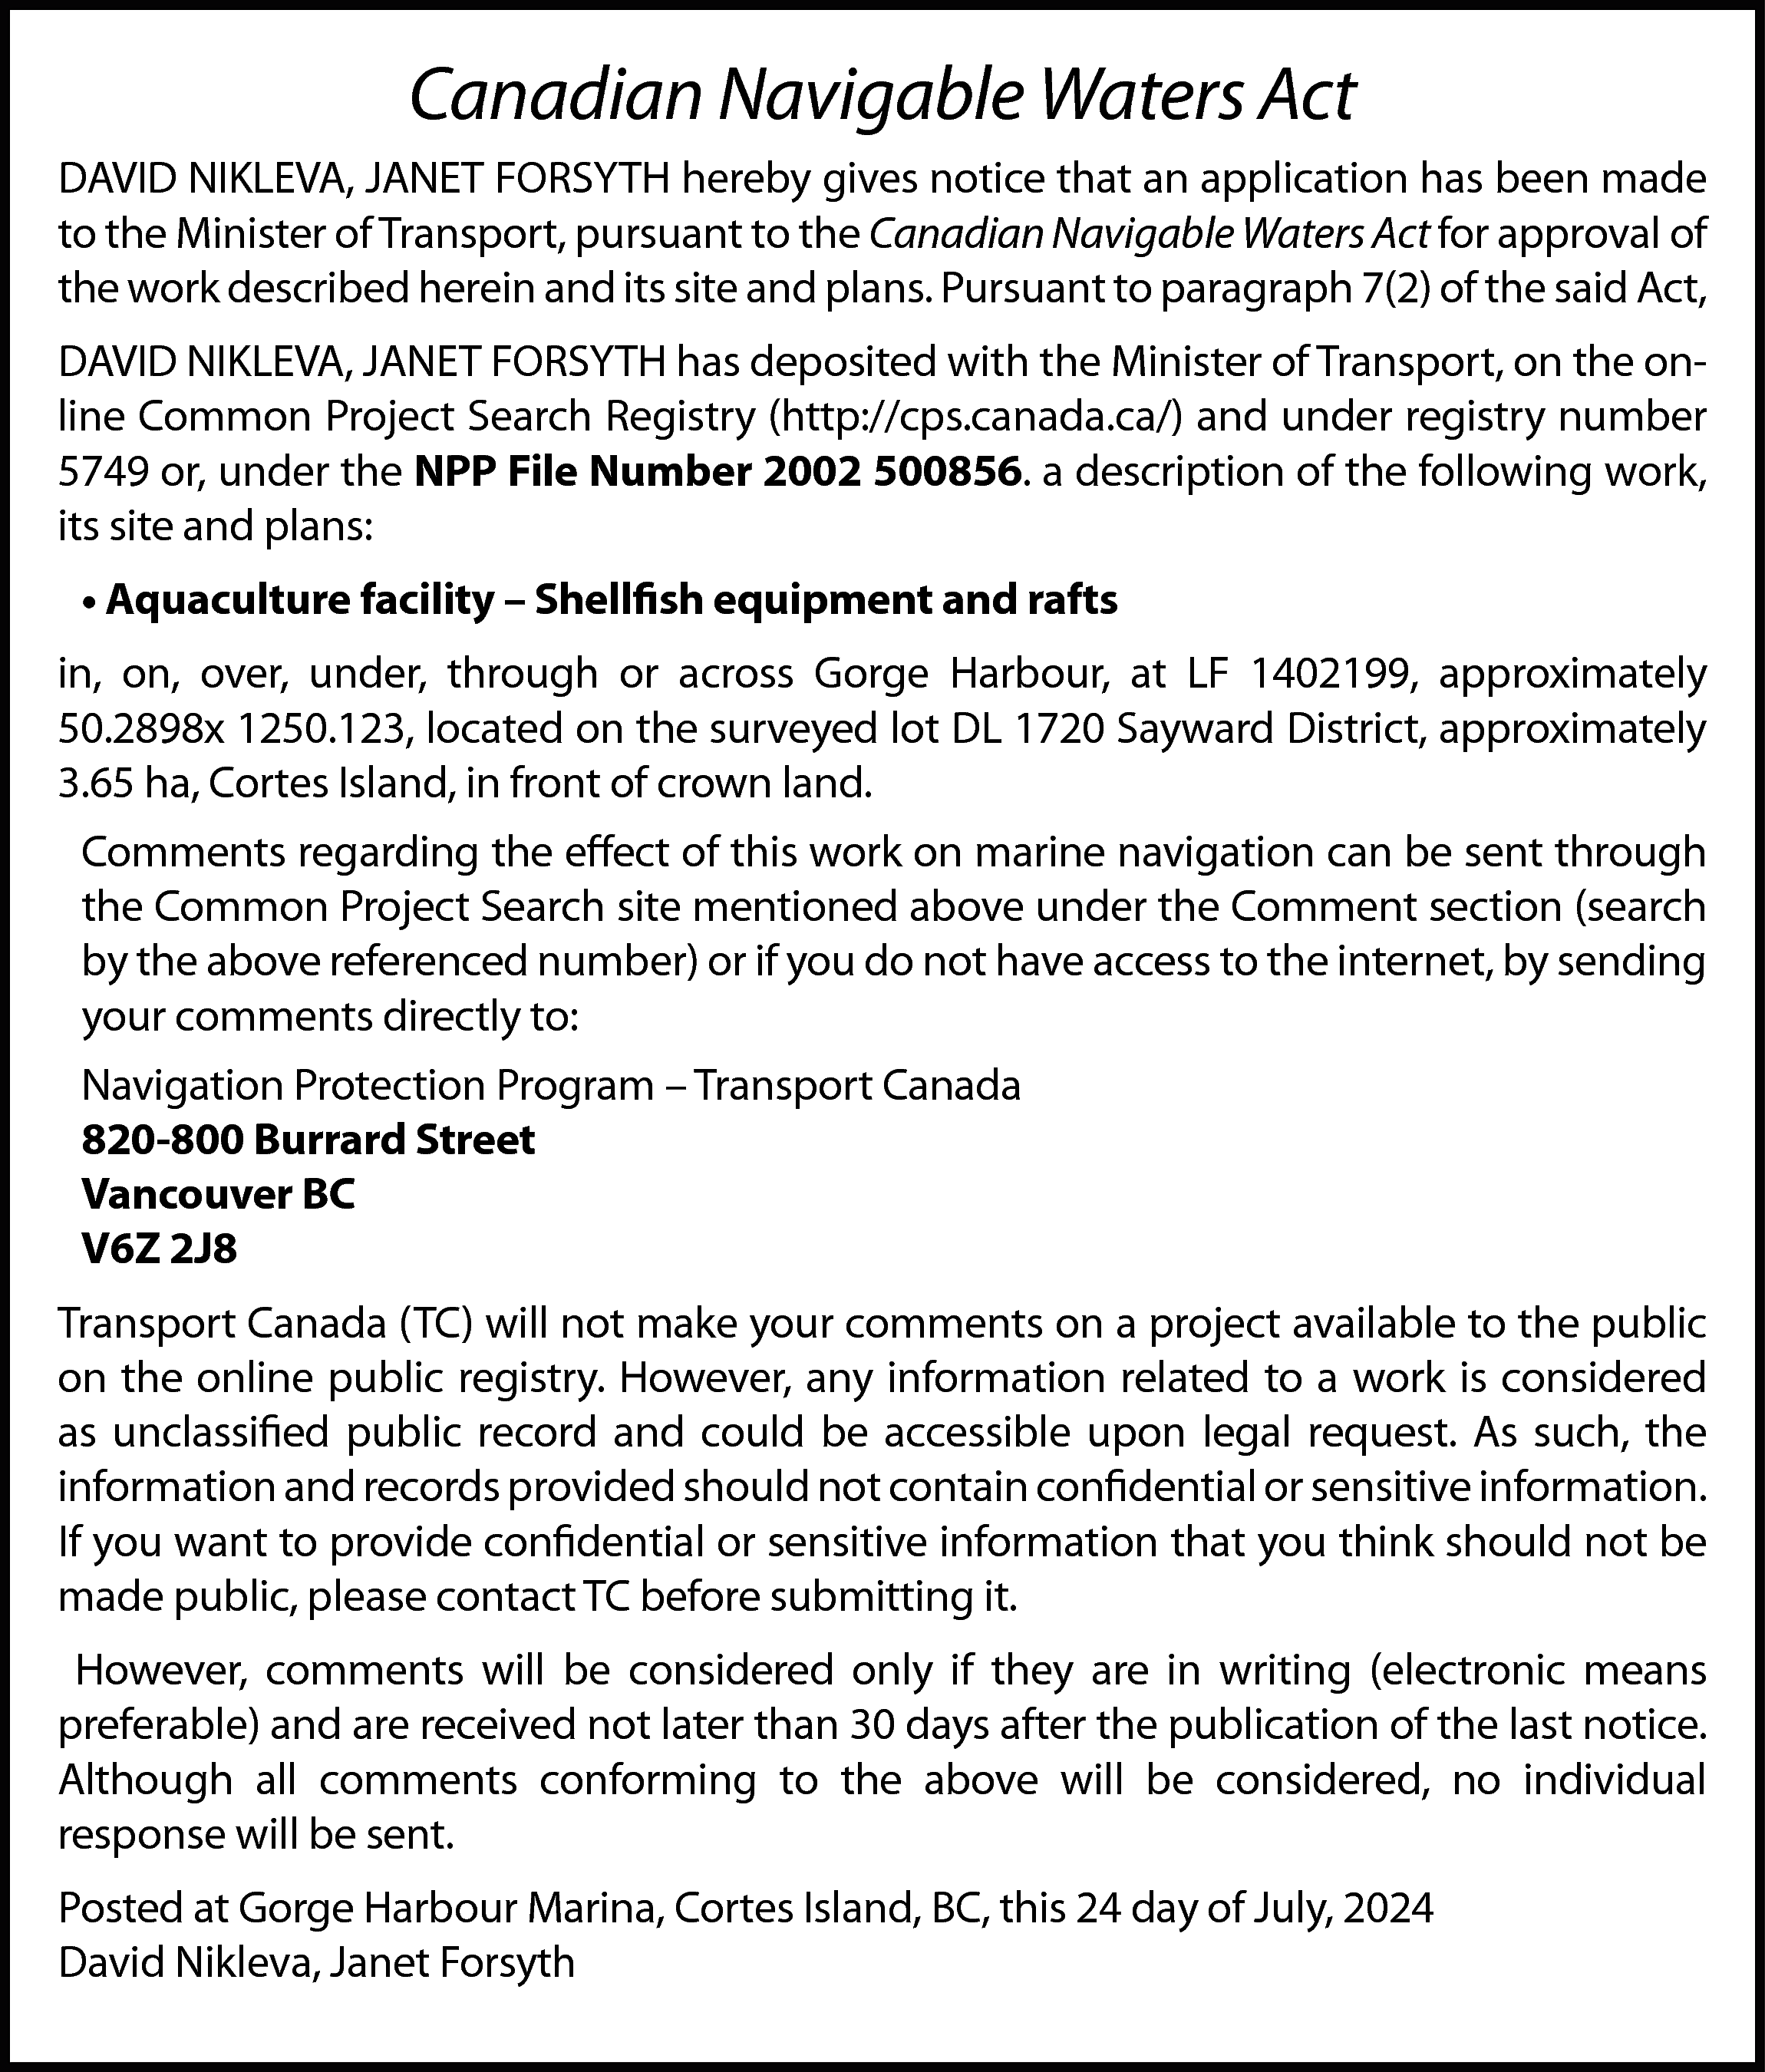 Canadian Navigable Waters Act <br>DAVID  Canadian Navigable Waters Act  DAVID NIKLEVA, JANET FORSYTH hereby gives notice that an application has been made  to the Minister of Transport, pursuant to the Canadian Navigable Waters Act for approval of  the work described herein and its site and plans. Pursuant to paragraph 7(2) of the said Act,  DAVID NIKLEVA, JANET FORSYTH has deposited with the Minister of Transport, on the online Common Project Search Registry (http://cps.canada.ca/) and under registry number  5749 or, under the NPP File Number 2002 500856. a description of the following work,  its site and plans:  • Aquaculture facility – Shellfish equipment and rafts  in, on, over, under, through or across Gorge Harbour, at LF 1402199, approximately  50.2898x 1250.123, located on the surveyed lot DL 1720 Sayward District, approximately  3.65 ha, Cortes Island, in front of crown land.  Comments regarding the effect of this work on marine navigation can be sent through  the Common Project Search site mentioned above under the Comment section (search  by the above referenced number) or if you do not have access to the internet, by sending  your comments directly to:  Navigation Protection Program – Transport Canada  820-800 Burrard Street  Vancouver BC  V6Z 2J8  Transport Canada (TC) will not make your comments on a project available to the public  on the online public registry. However, any information related to a work is considered  as unclassified public record and could be accessible upon legal request. As such, the  information and records provided should not contain confidential or sensitive information.  If you want to provide confidential or sensitive information that you think should not be  made public, please contact TC before submitting it.  However, comments will be considered only if they are in writing (electronic means  preferable) and are received not later than 30 days after the publication of the last notice.  Although all comments conforming to the above will be considered, no individual  response will be sent.  Posted at Gorge Harbour Marina, Cortes Island, BC, this 24 day of July, 2024  David Nikleva, Janet Forsyth    